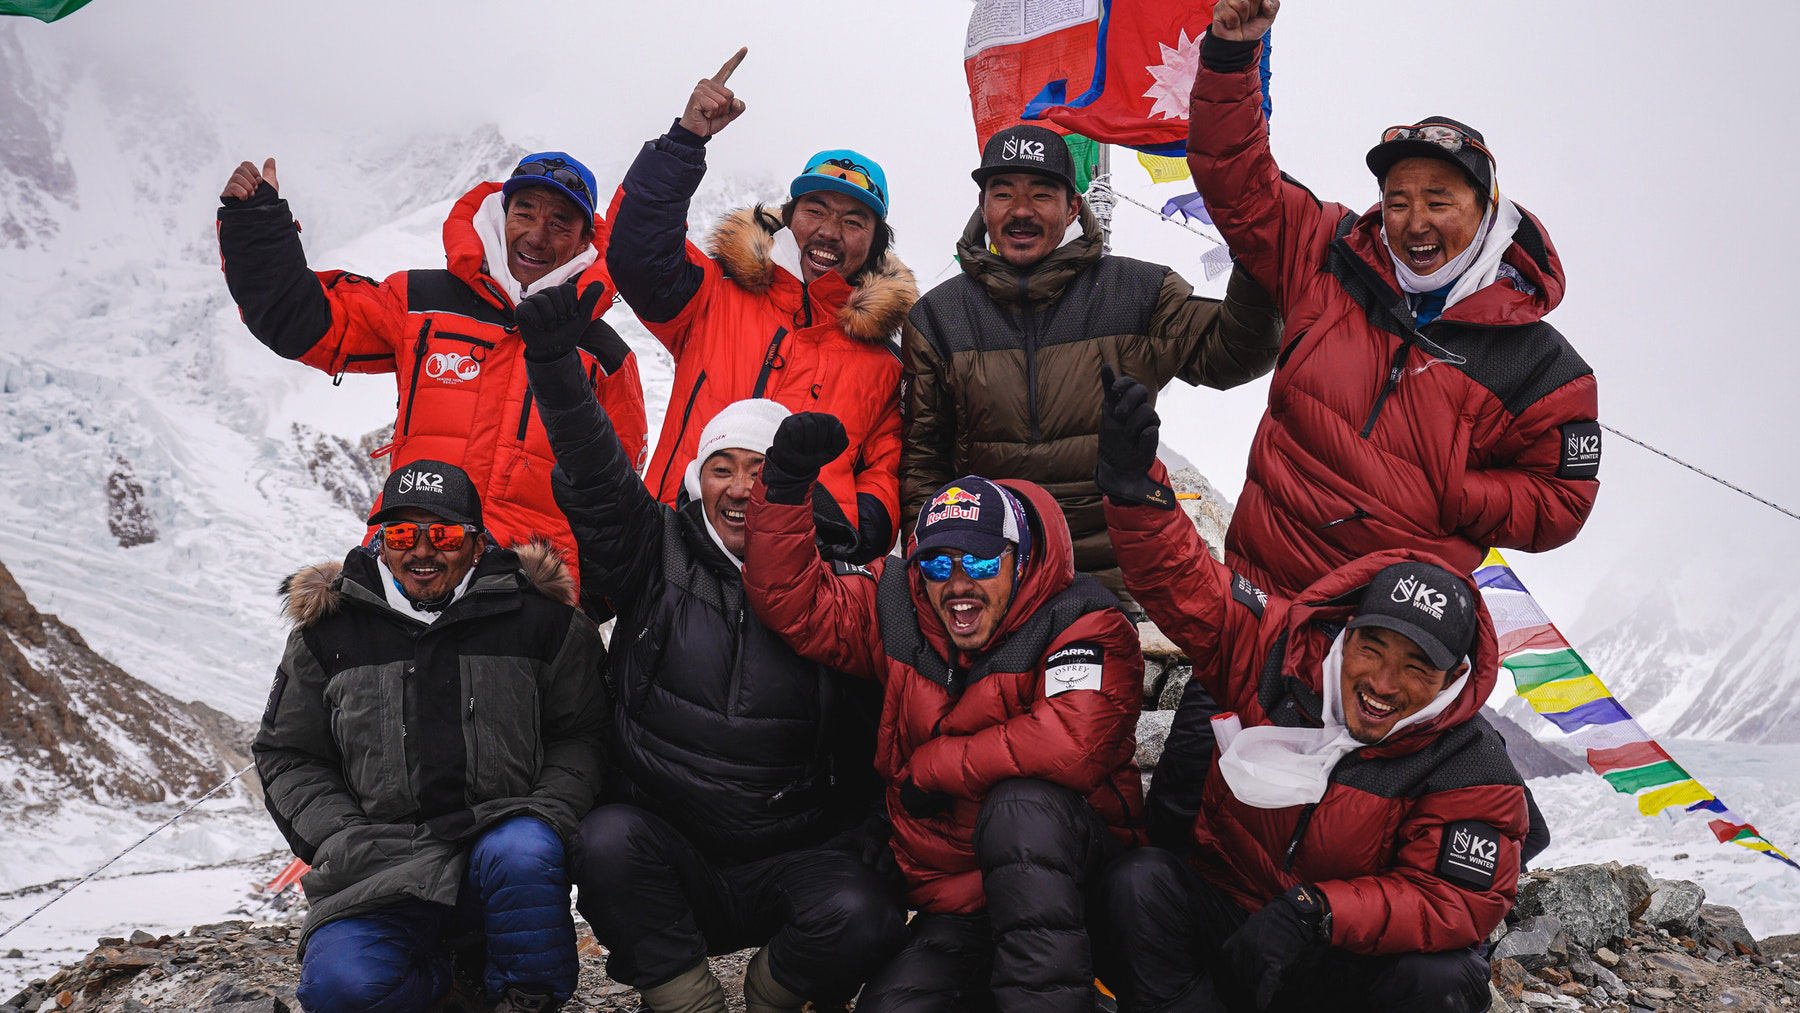 10 Nepali mountaineers scale Mount K2, setting record to conquer world’s second highest peak in winter